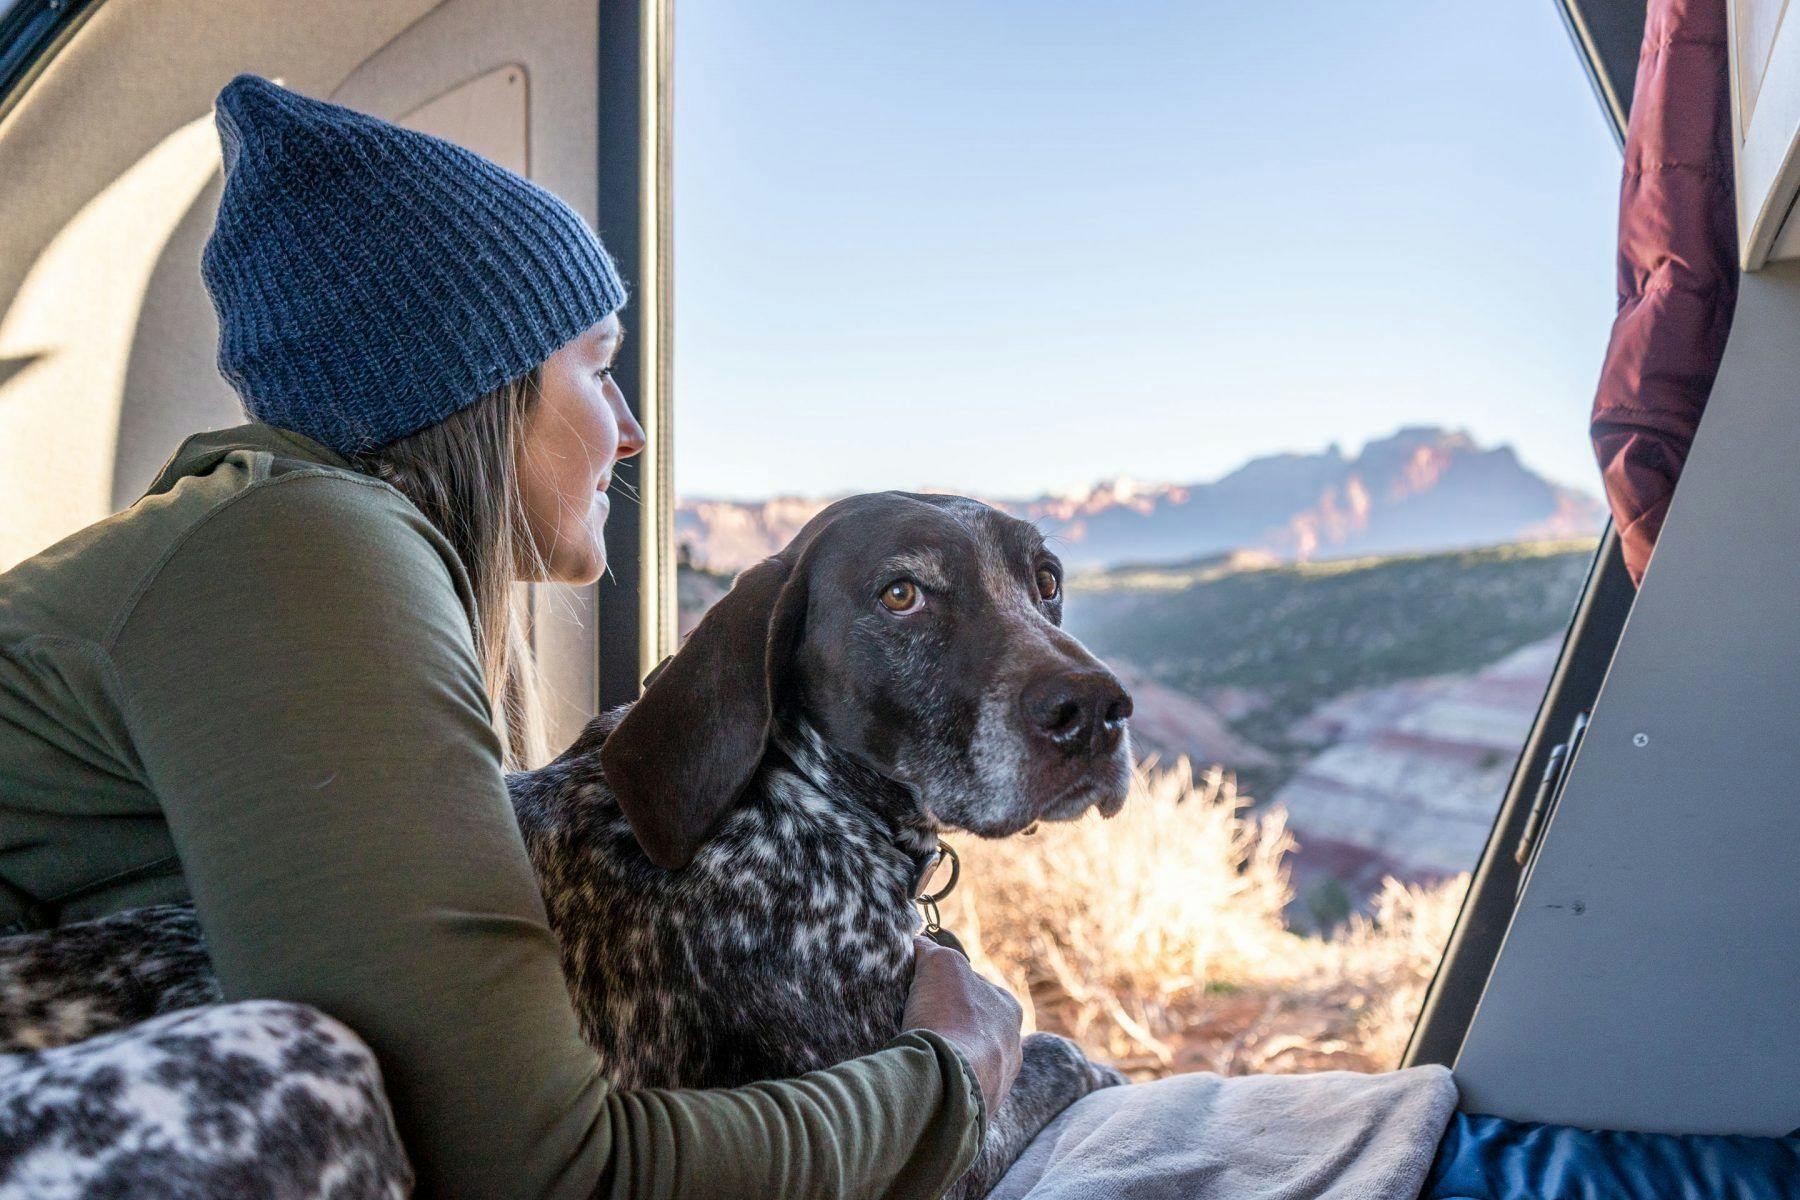 A woman wearing a green jacket and a blue beanie and her dog enjoying the cabin of a teardrop camper.